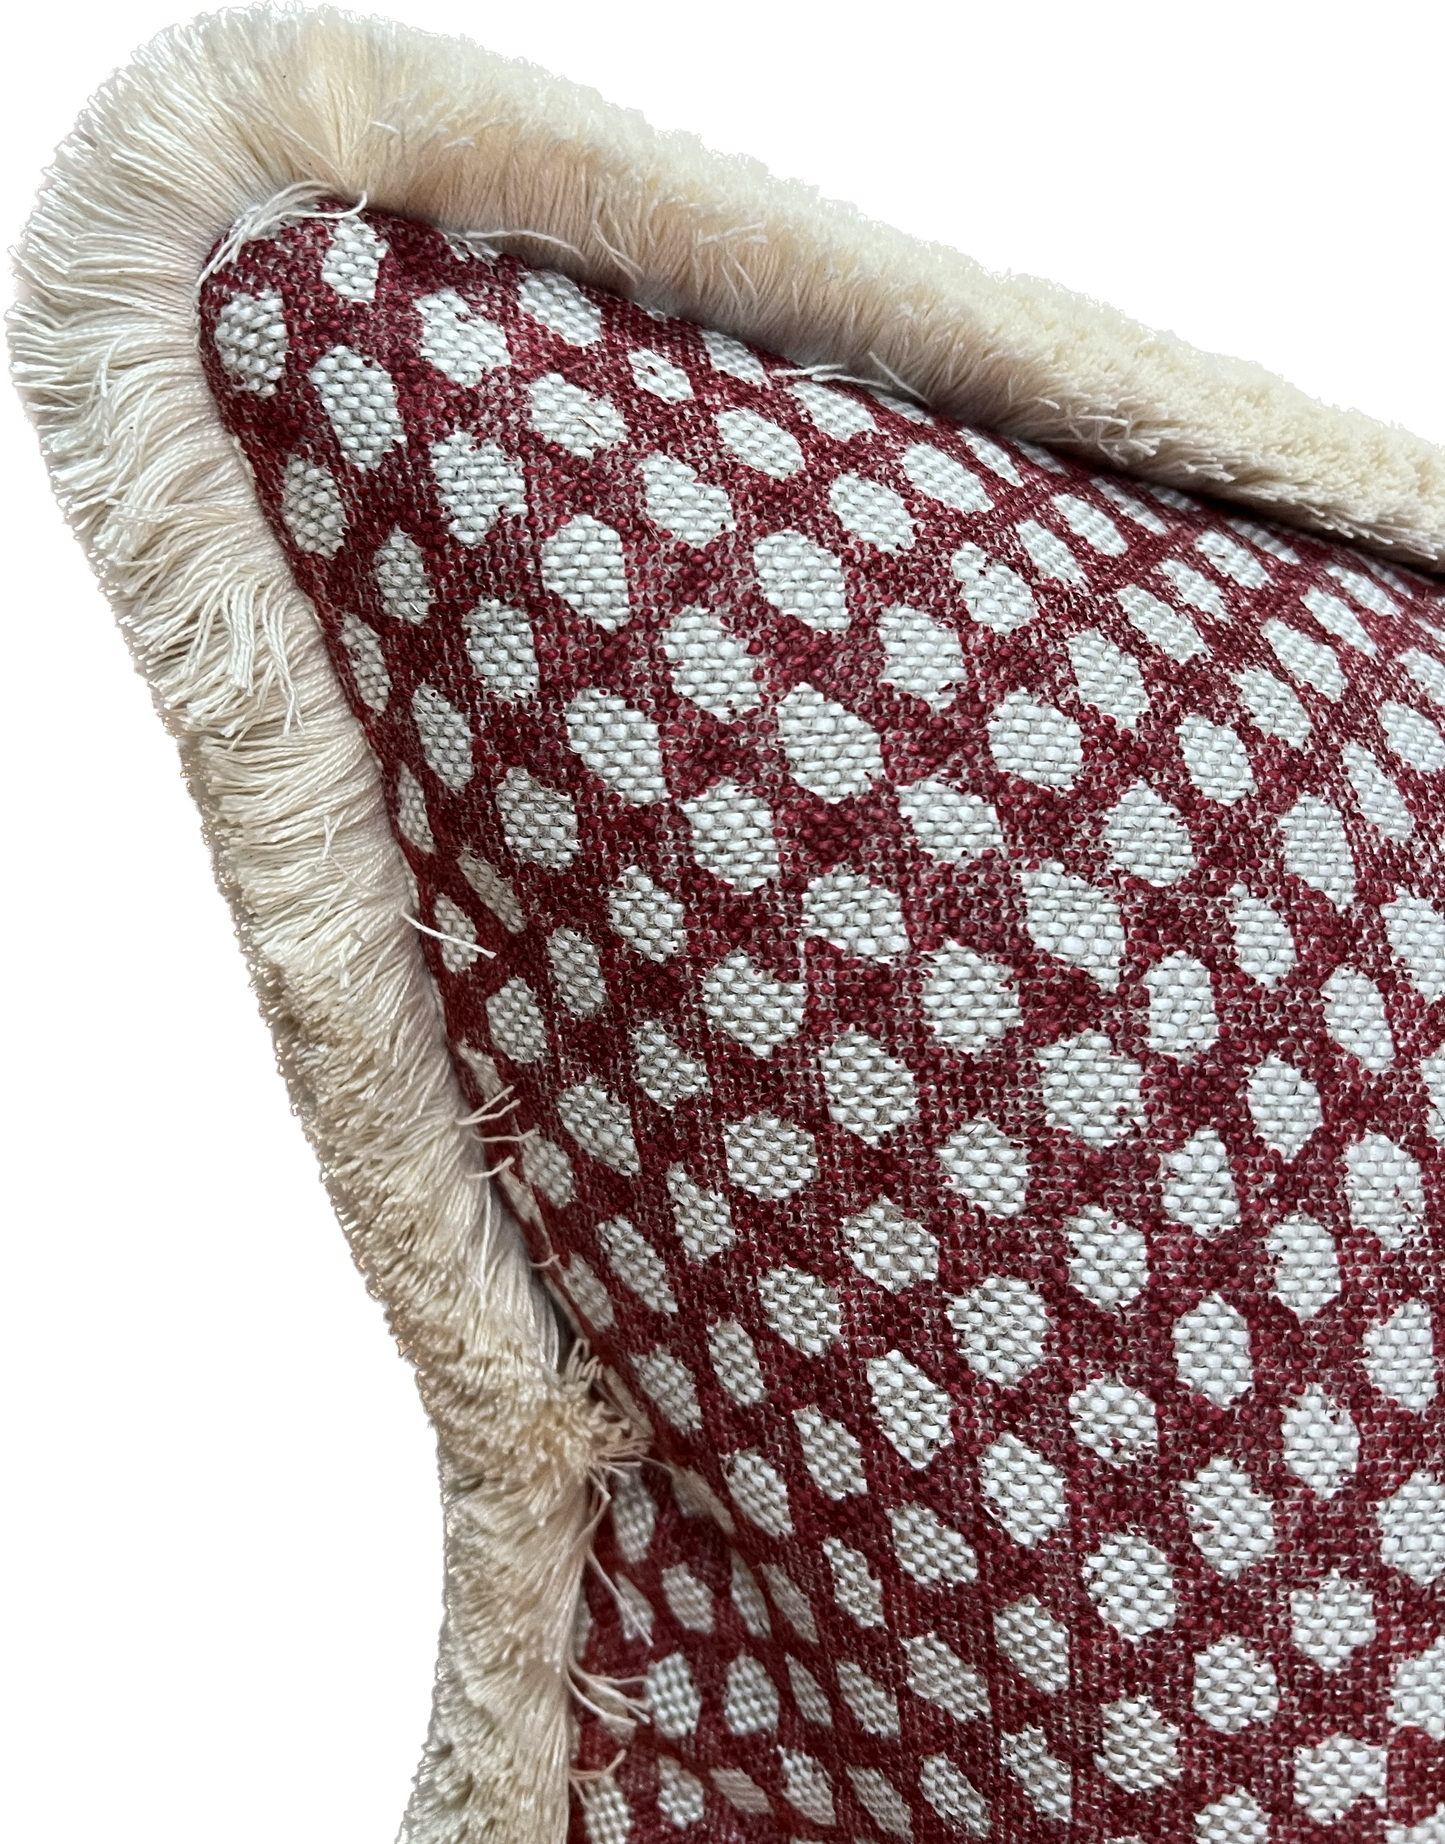 Made to Order Cushions in Fermoie Wicker N-087